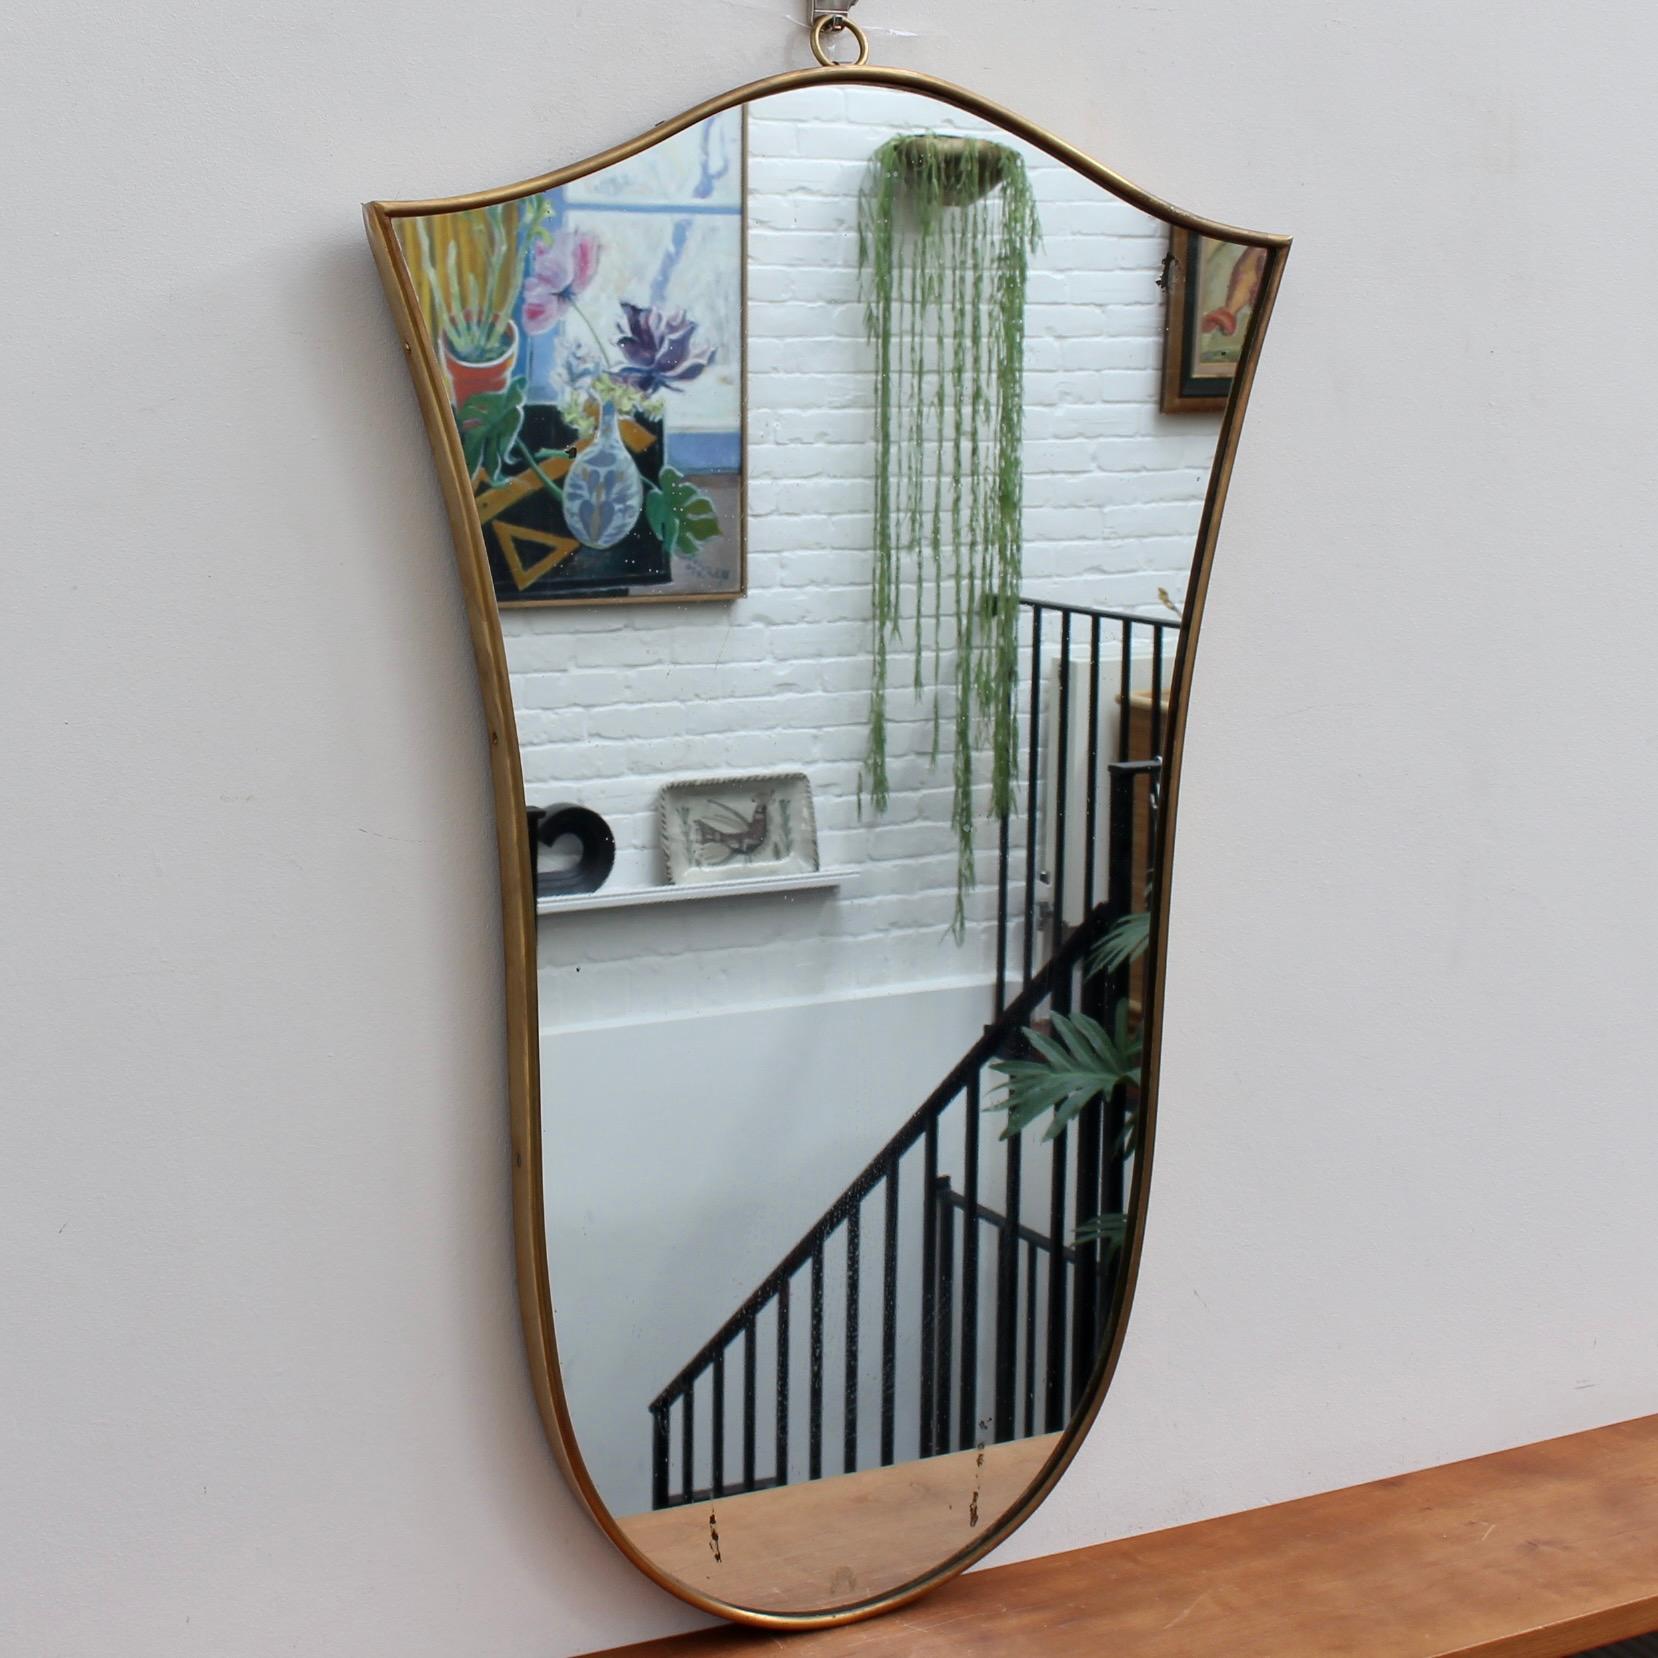 Mid-Century Italian wall mirror with brass frame (circa 1950s). This mirror has sensuous curves yet retains its solidity and imposing good looks. The tulip-shape is rarely found in this style of mirror. It is in fair vintage condition with several